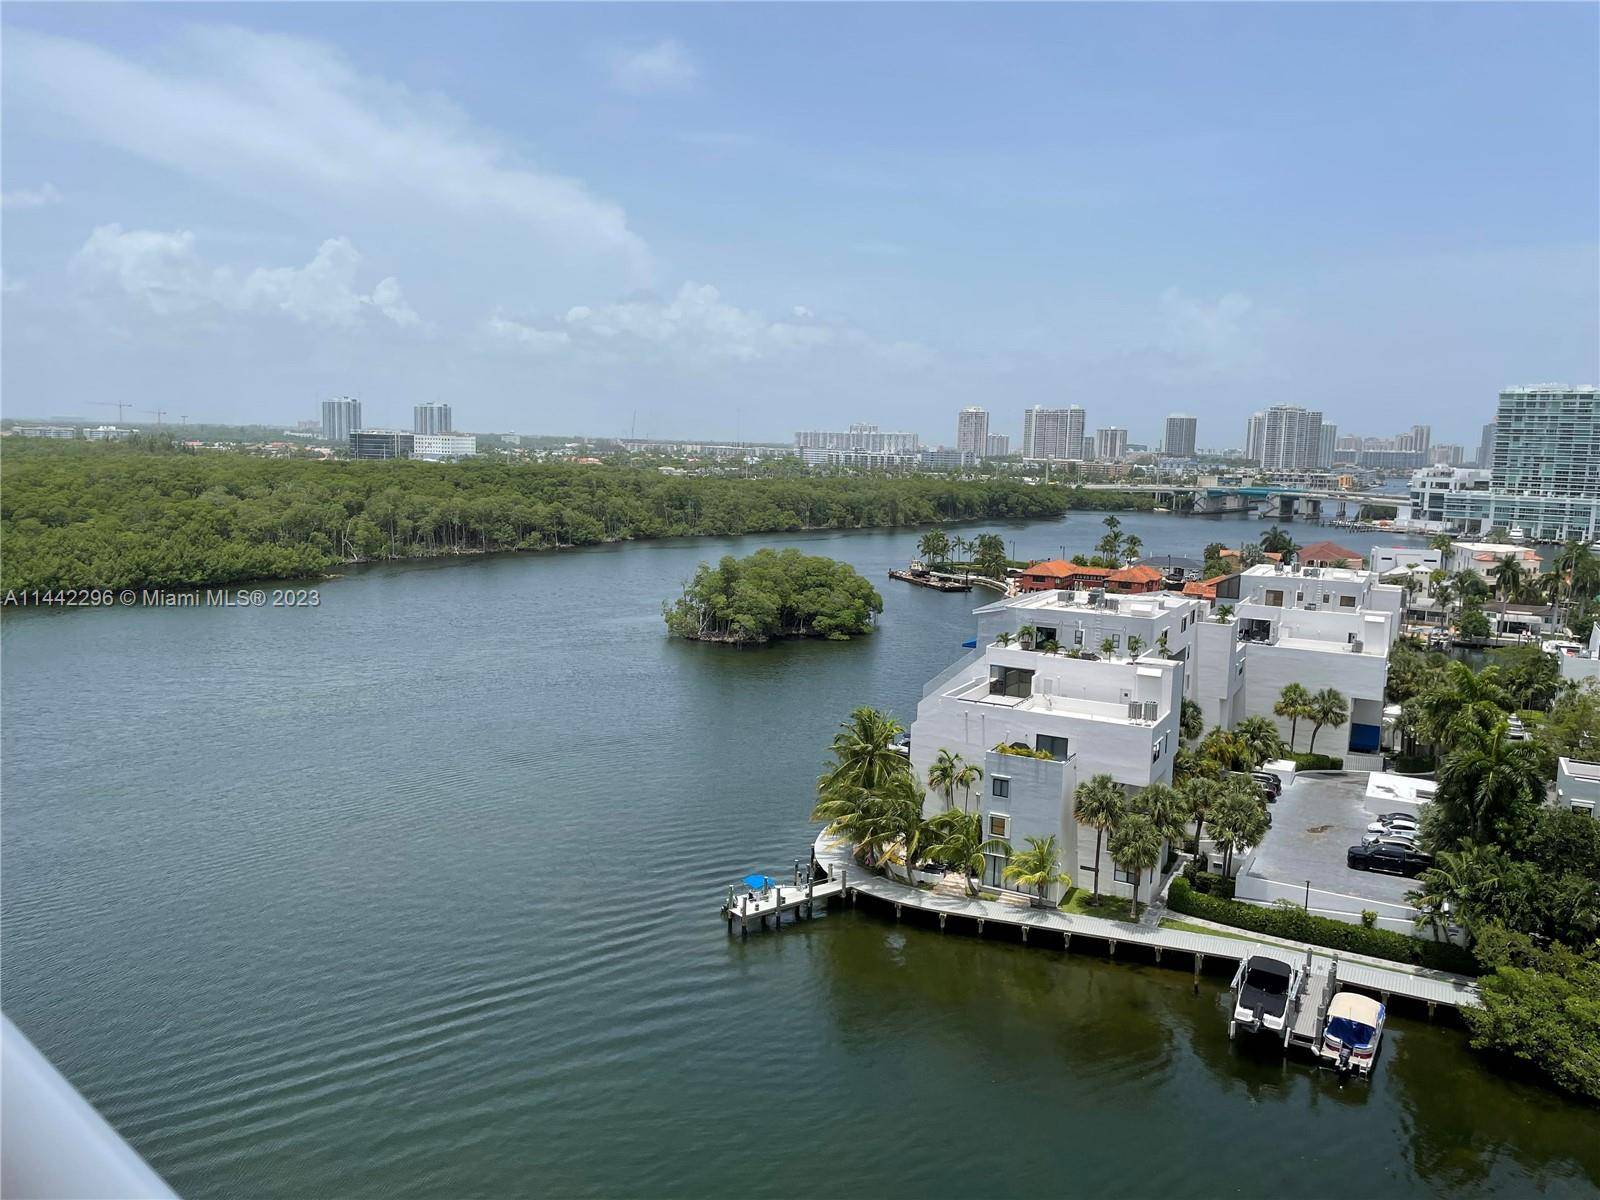 GREAT LOCATION, BEAUTIFUL VIEW OF THE INTRACOASTAL, WALKING DISTANCE TO THE BEACH, HEATED POOL, NEWER GYM LOOKING TO THE BAY.